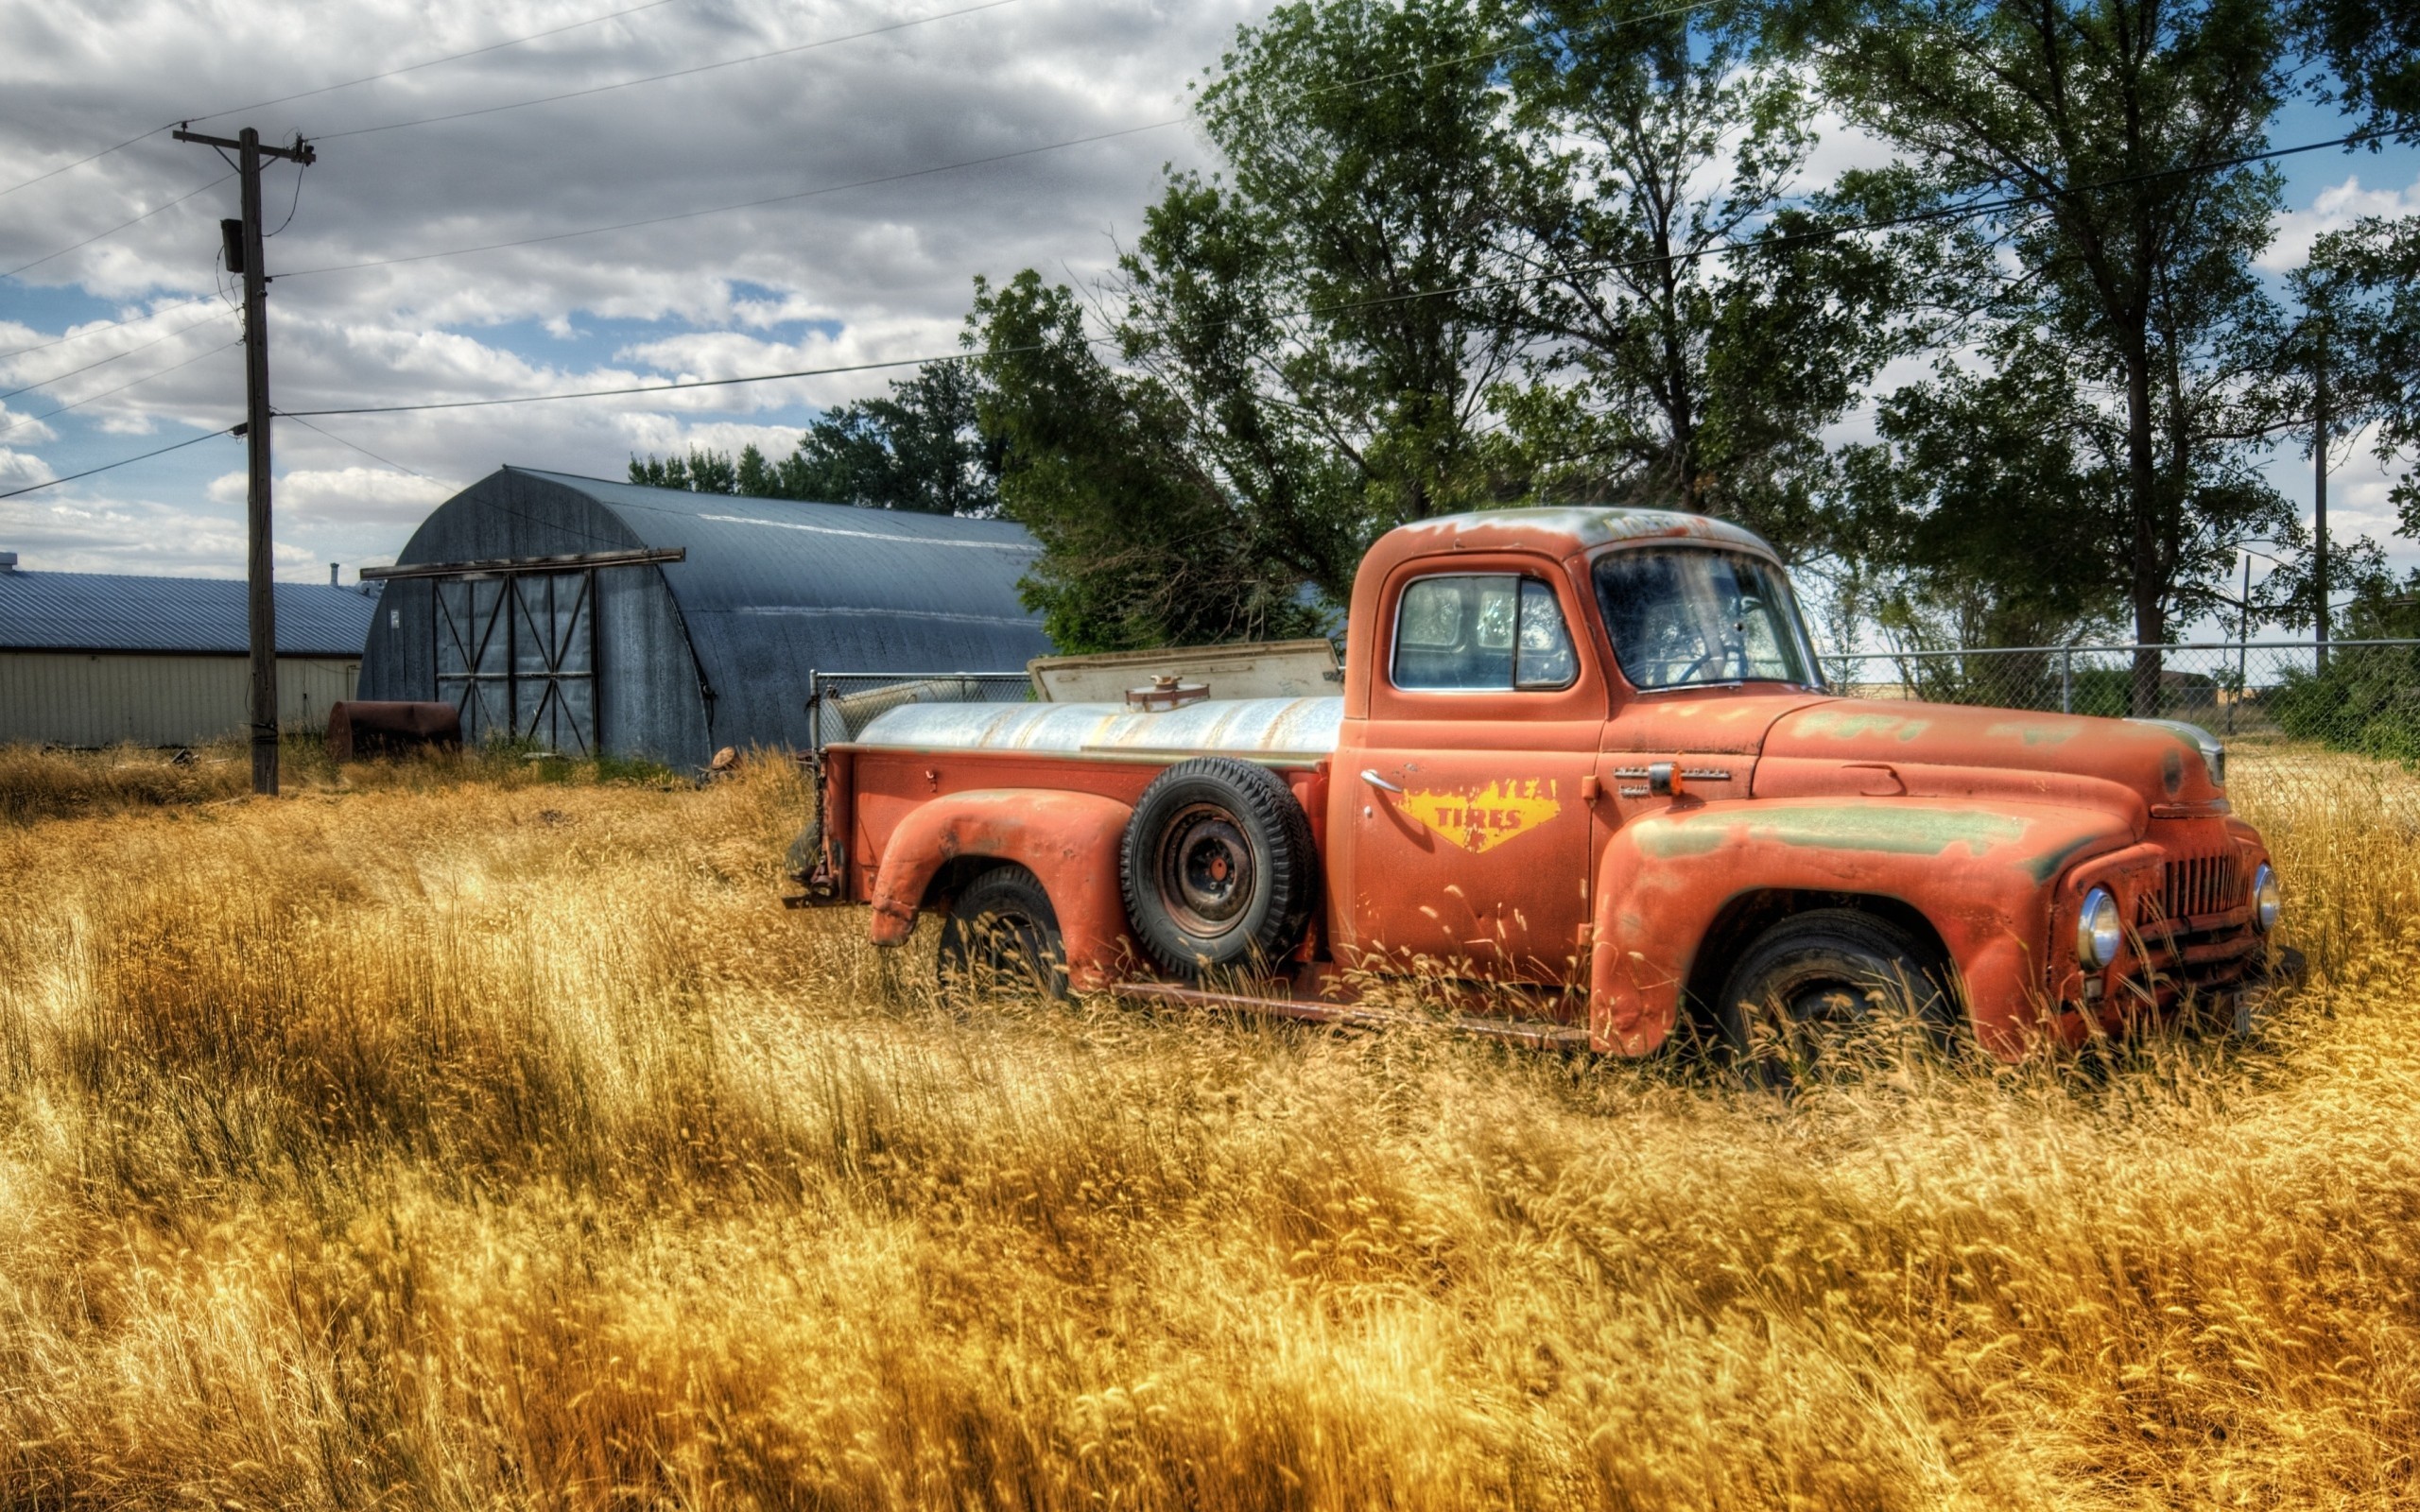 Old Ford Truck Wallpaper | HD Wallpapers